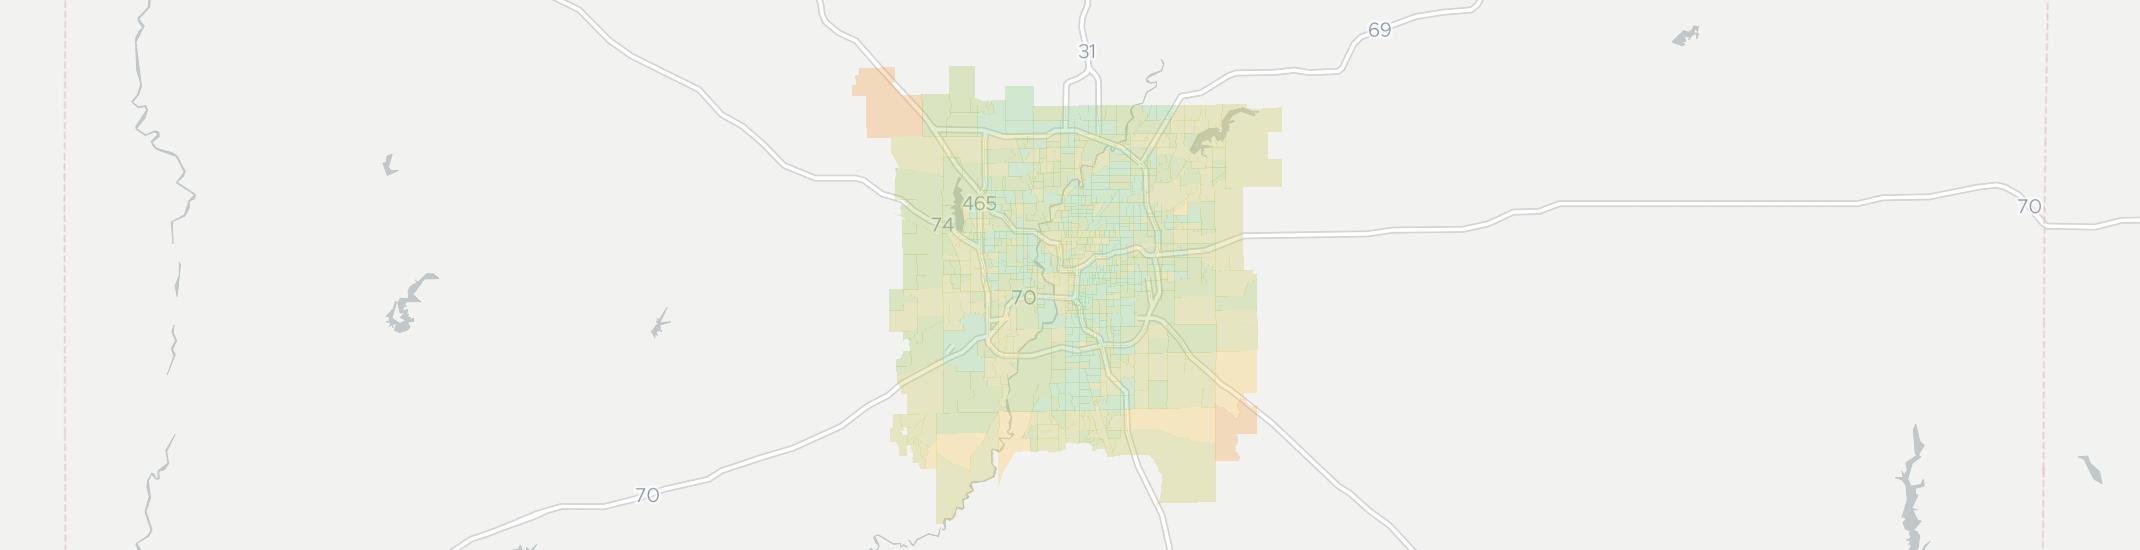 29 Zip Code Map Indianapolis Online Map Around The World